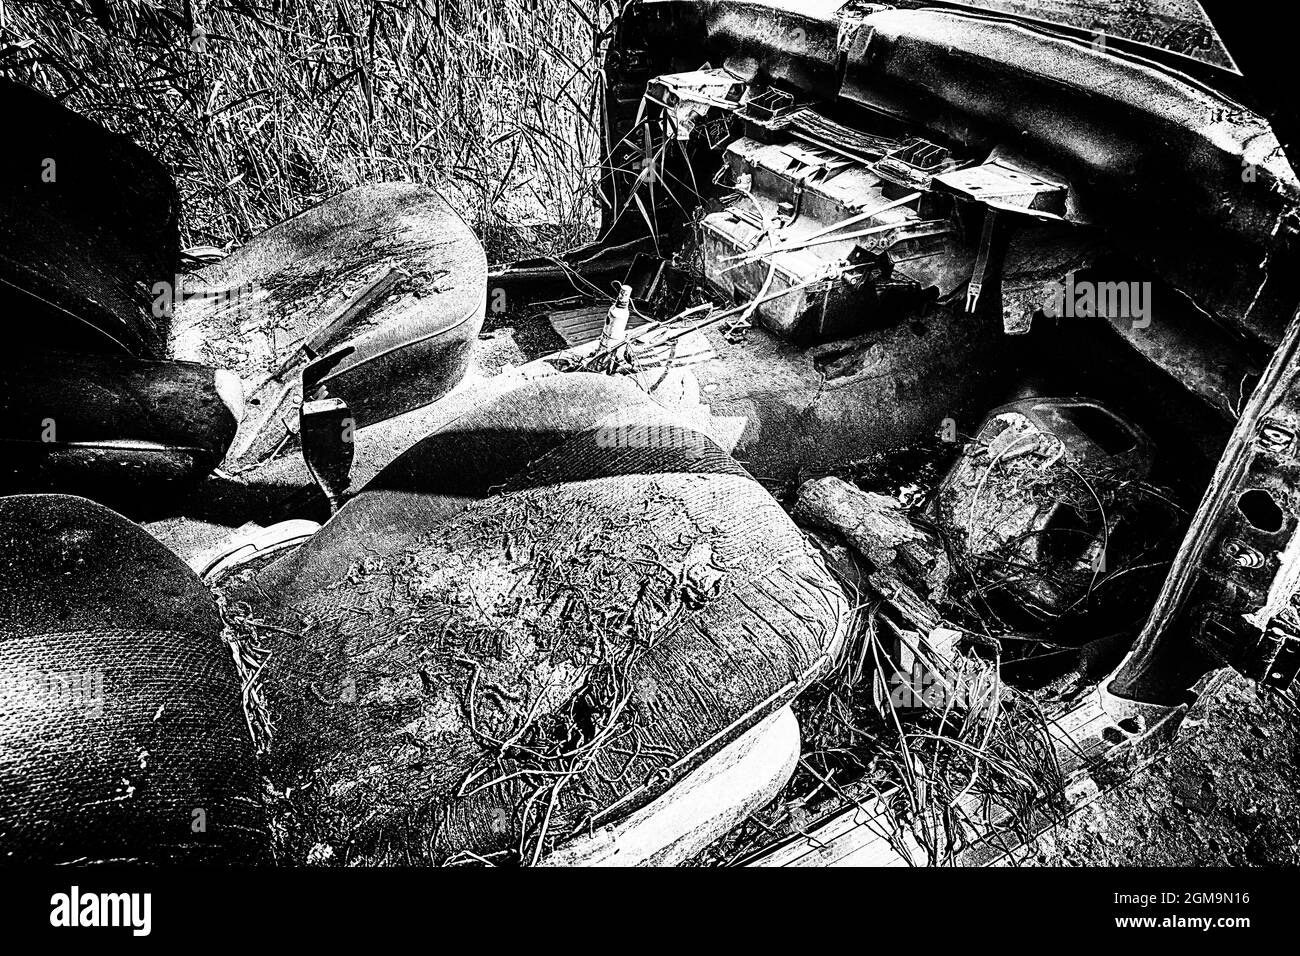 Black and white concept an ugly interior of a car in dry grass and twigs thrown into the environment after an accident Stock Photo